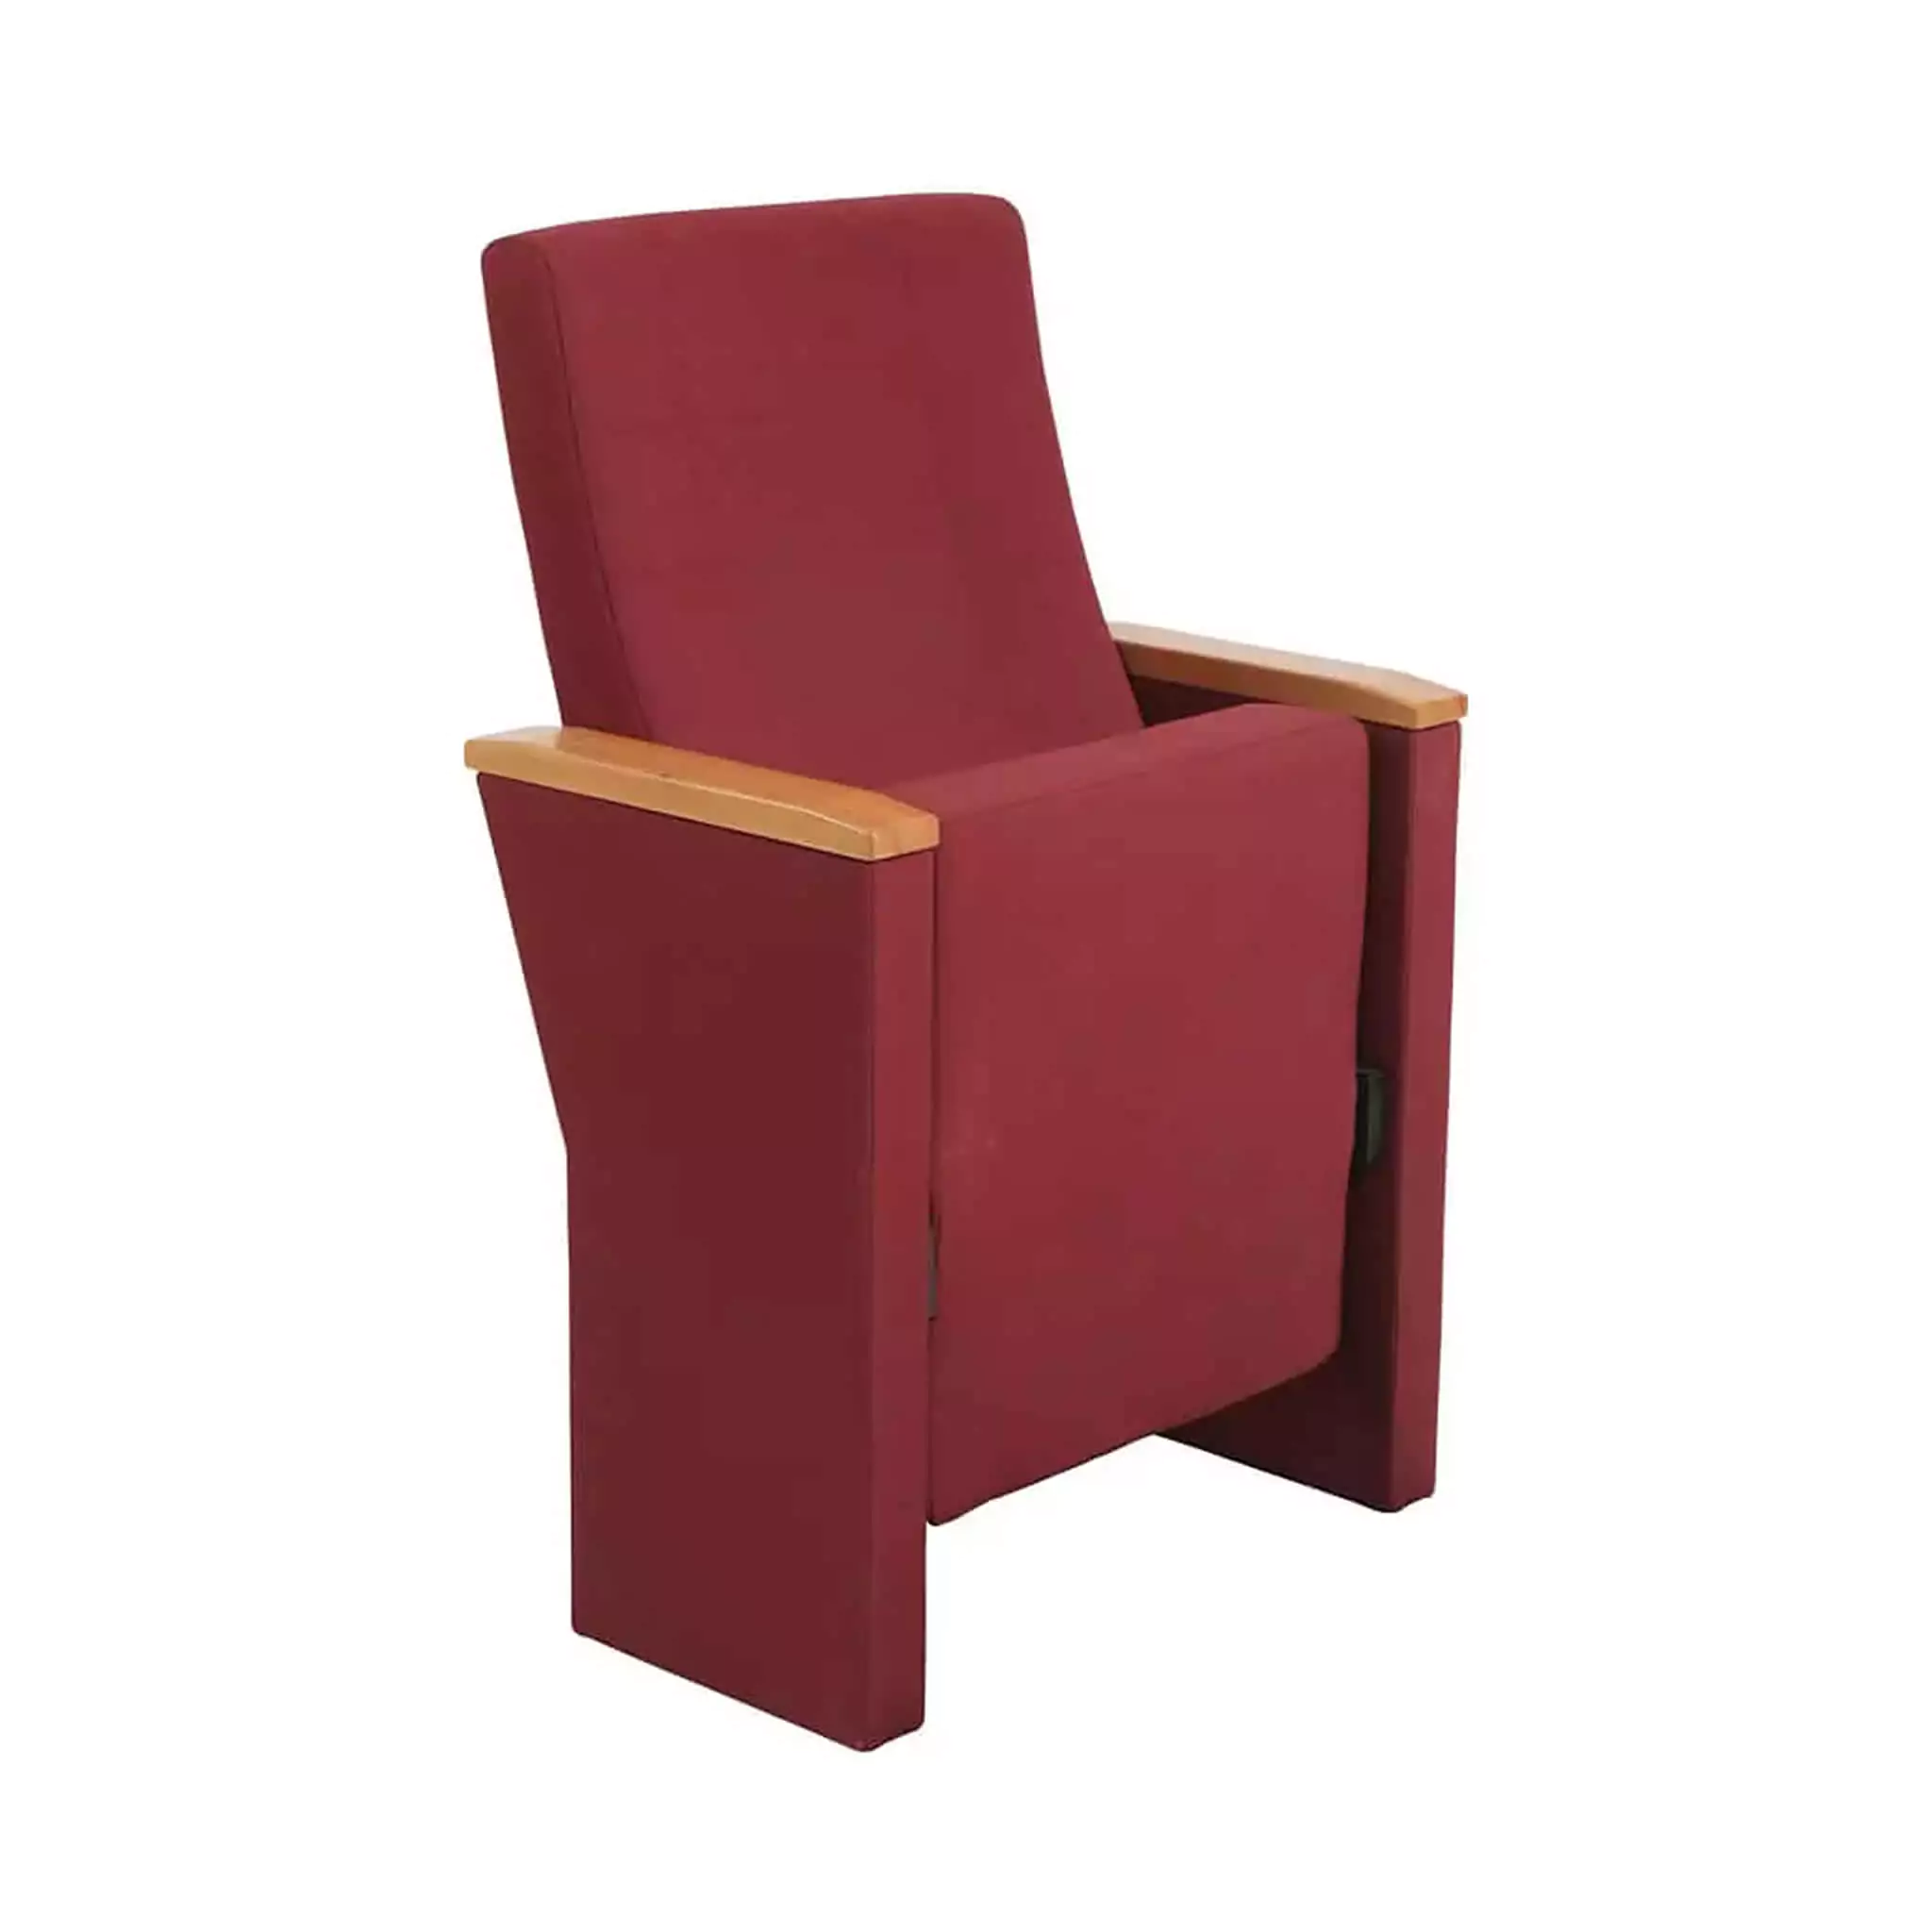 Simko Seating Product Conference Seat Safir S 05